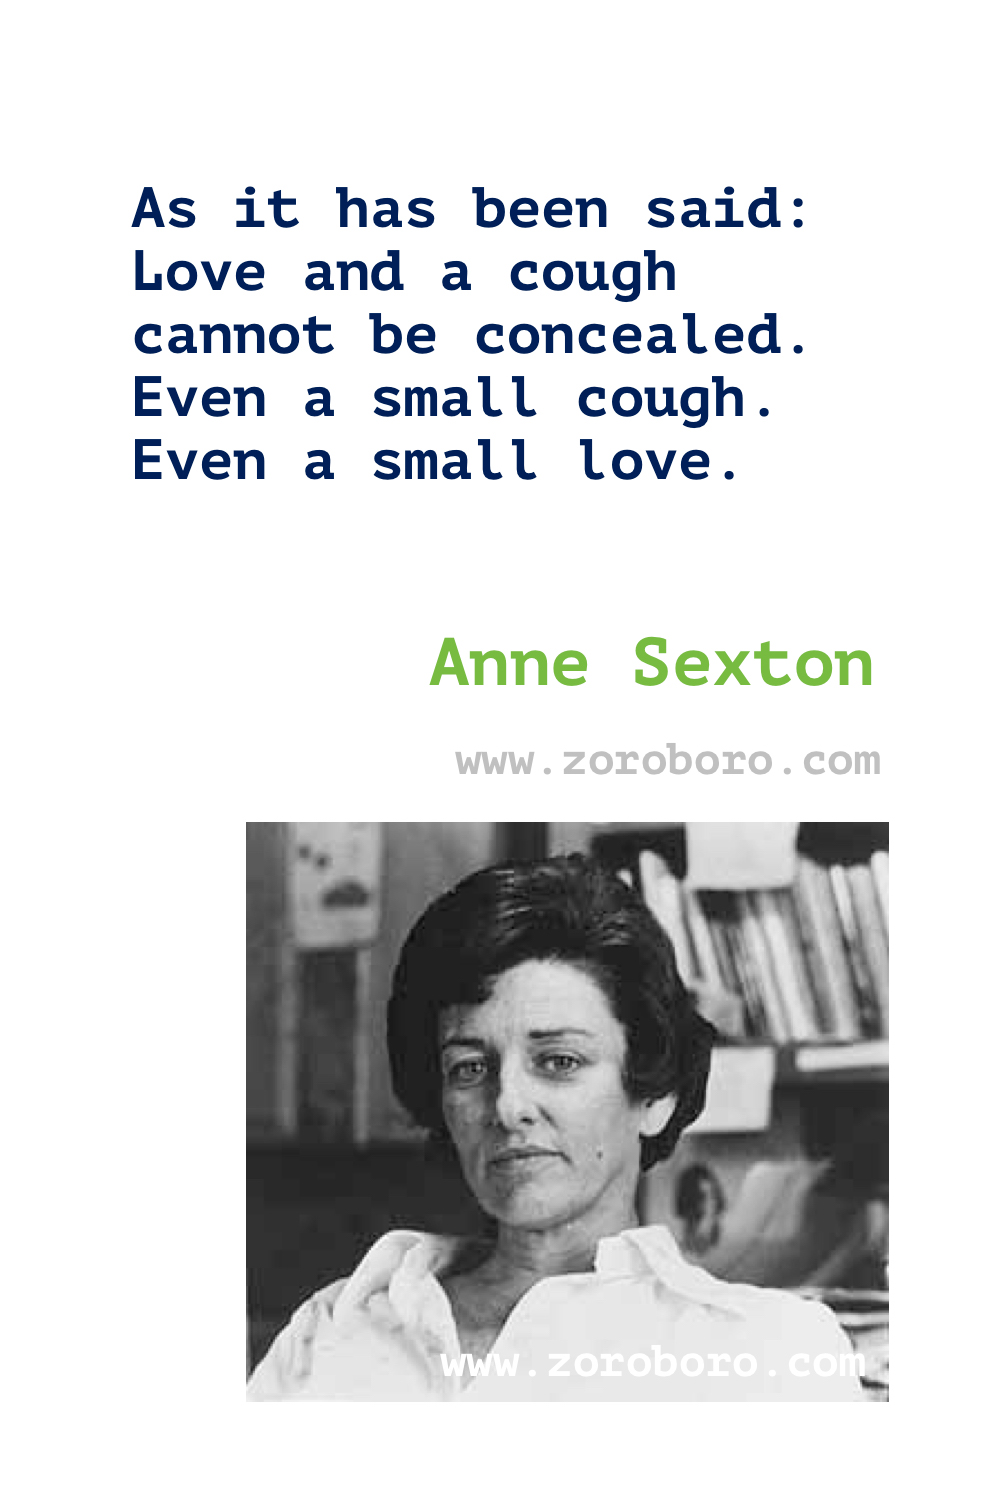 Anne Sexton Quotes. Anne Sexton Poems. Poetry. Anne Sexton Books Quotes. Poems By Anne Sexton.